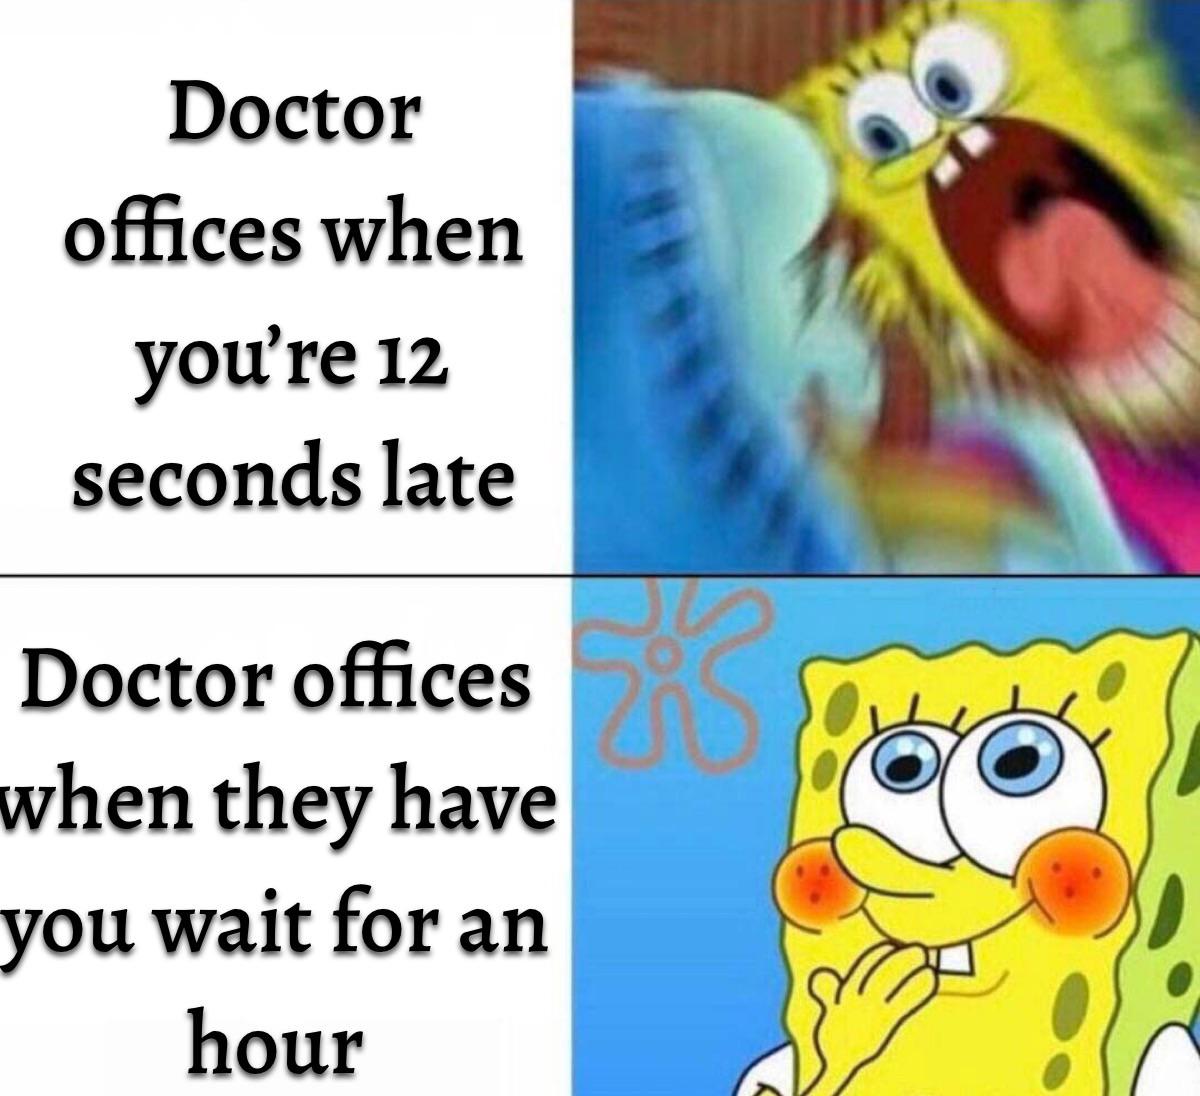 funny memes - spongebob memes clean - Doctor offices when you're 12 seconds late Doctor offices when they have you wait for an hour